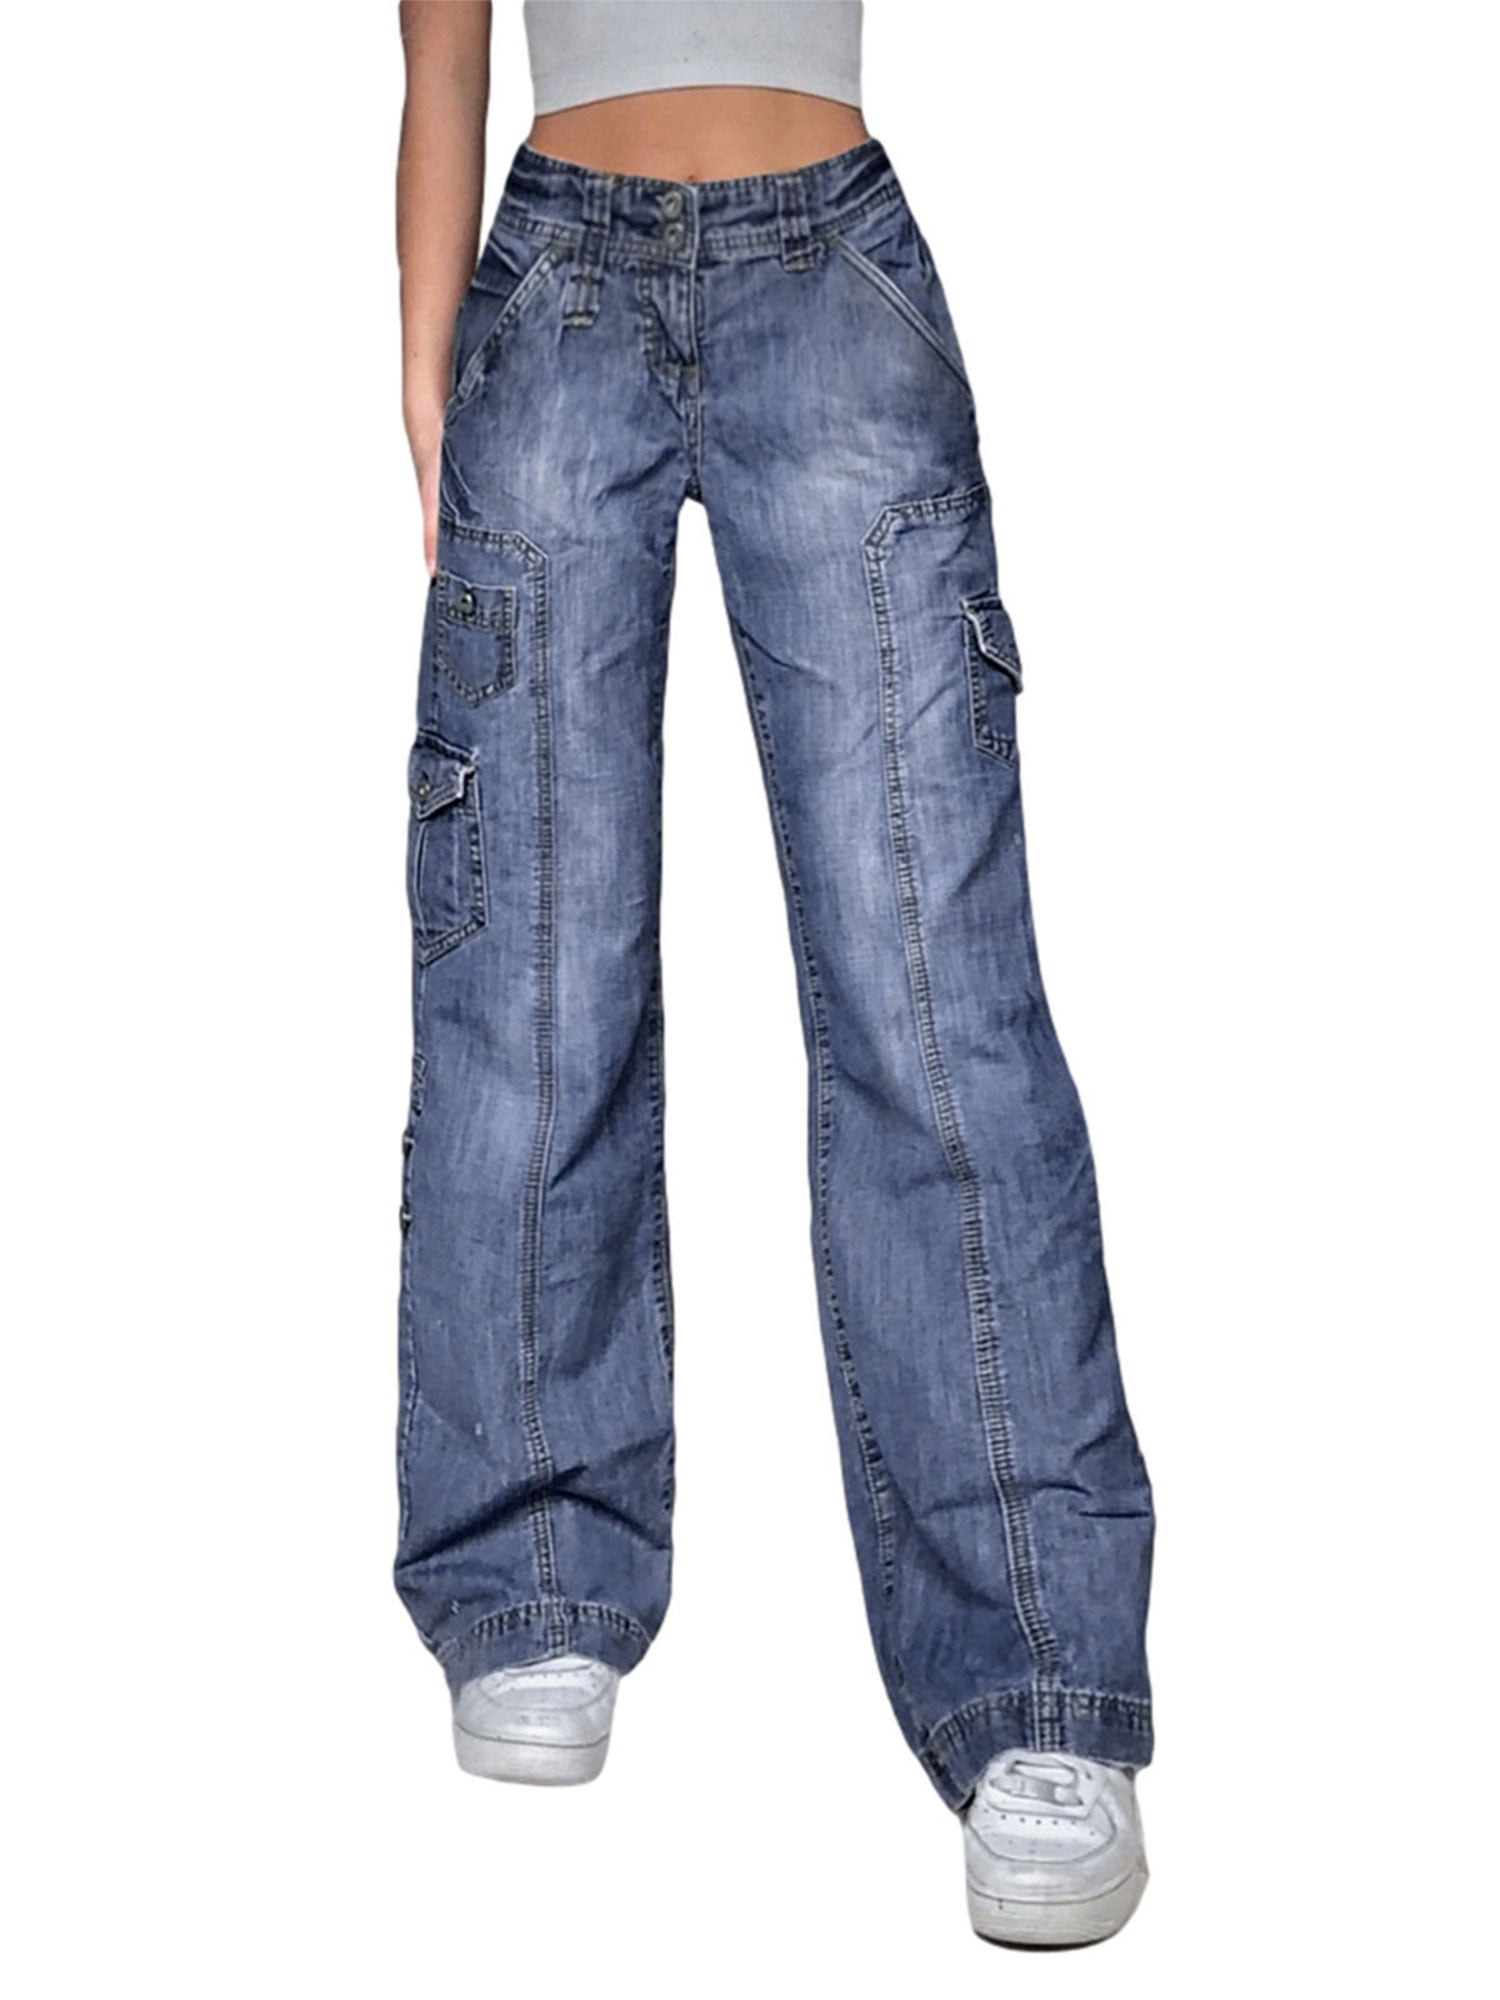 Women's Baggy Jeans, Baggy Low-Rise + Oversized